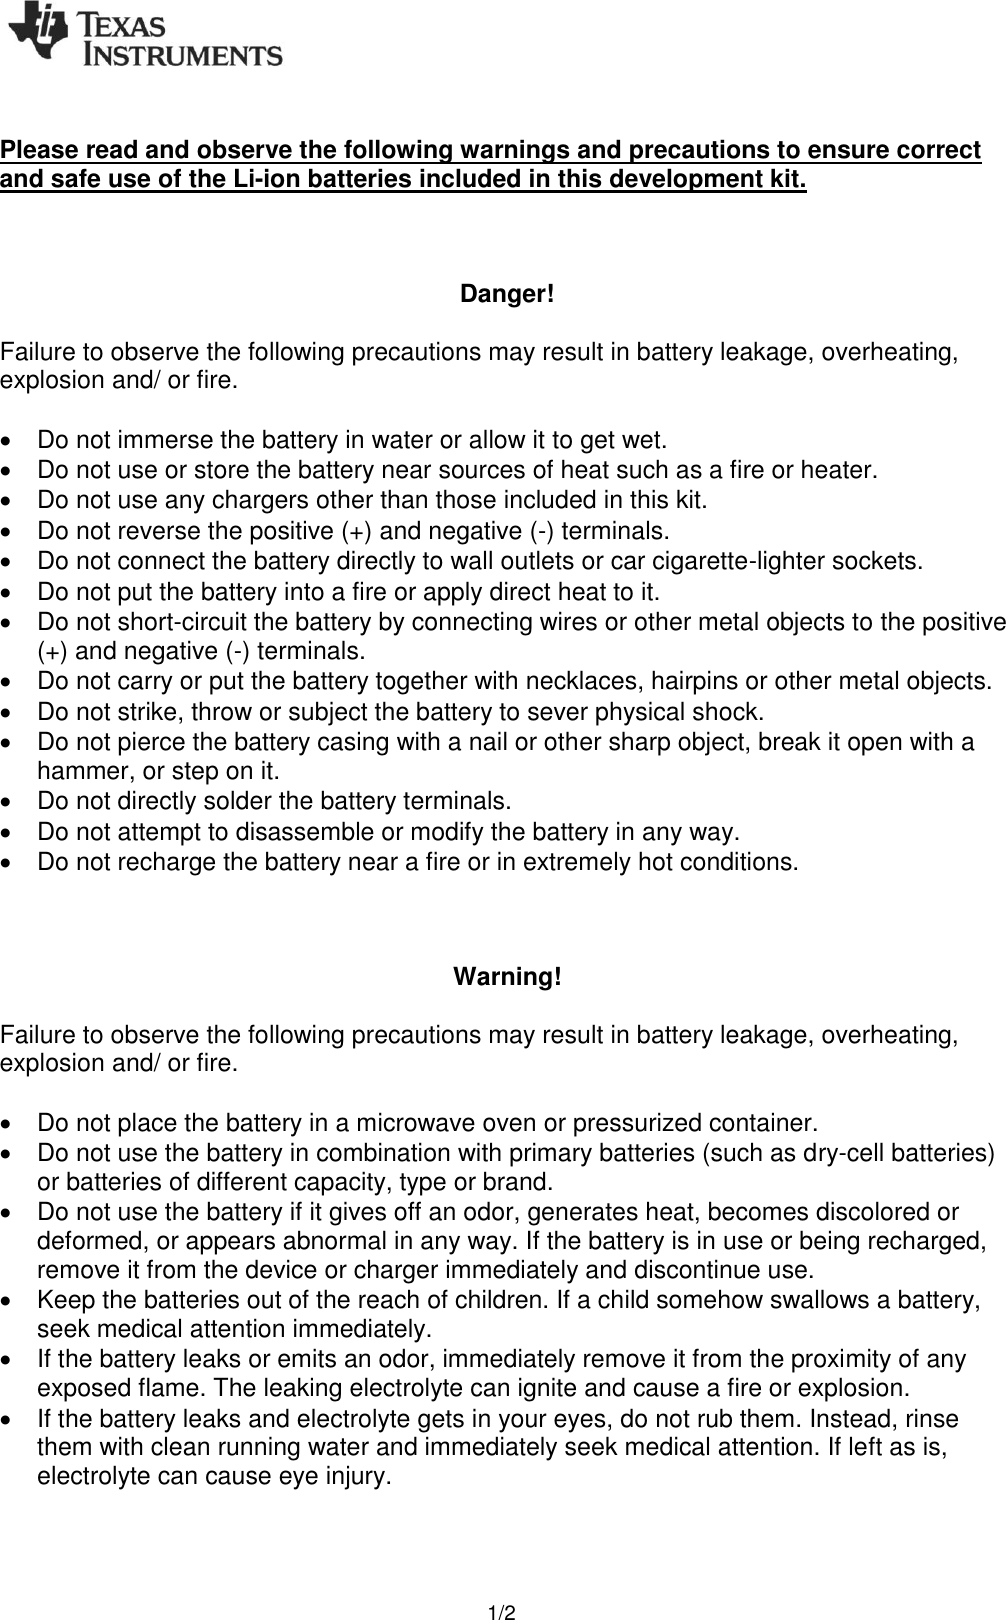    1/2  Please read and observe the following warnings and precautions to ensure correct and safe use of the Li-ion batteries included in this development kit.    Danger!  Failure to observe the following precautions may result in battery leakage, overheating, explosion and/ or fire.    Do not immerse the battery in water or allow it to get wet.   Do not use or store the battery near sources of heat such as a fire or heater.   Do not use any chargers other than those included in this kit.   Do not reverse the positive (+) and negative (-) terminals.   Do not connect the battery directly to wall outlets or car cigarette-lighter sockets.   Do not put the battery into a fire or apply direct heat to it.   Do not short-circuit the battery by connecting wires or other metal objects to the positive (+) and negative (-) terminals.   Do not carry or put the battery together with necklaces, hairpins or other metal objects.   Do not strike, throw or subject the battery to sever physical shock.   Do not pierce the battery casing with a nail or other sharp object, break it open with a hammer, or step on it.   Do not directly solder the battery terminals.   Do not attempt to disassemble or modify the battery in any way.   Do not recharge the battery near a fire or in extremely hot conditions.    Warning!  Failure to observe the following precautions may result in battery leakage, overheating, explosion and/ or fire.    Do not place the battery in a microwave oven or pressurized container.   Do not use the battery in combination with primary batteries (such as dry-cell batteries) or batteries of different capacity, type or brand.   Do not use the battery if it gives off an odor, generates heat, becomes discolored or deformed, or appears abnormal in any way. If the battery is in use or being recharged, remove it from the device or charger immediately and discontinue use.   Keep the batteries out of the reach of children. If a child somehow swallows a battery, seek medical attention immediately.   If the battery leaks or emits an odor, immediately remove it from the proximity of any exposed flame. The leaking electrolyte can ignite and cause a fire or explosion.   If the battery leaks and electrolyte gets in your eyes, do not rub them. Instead, rinse them with clean running water and immediately seek medical attention. If left as is, electrolyte can cause eye injury.   